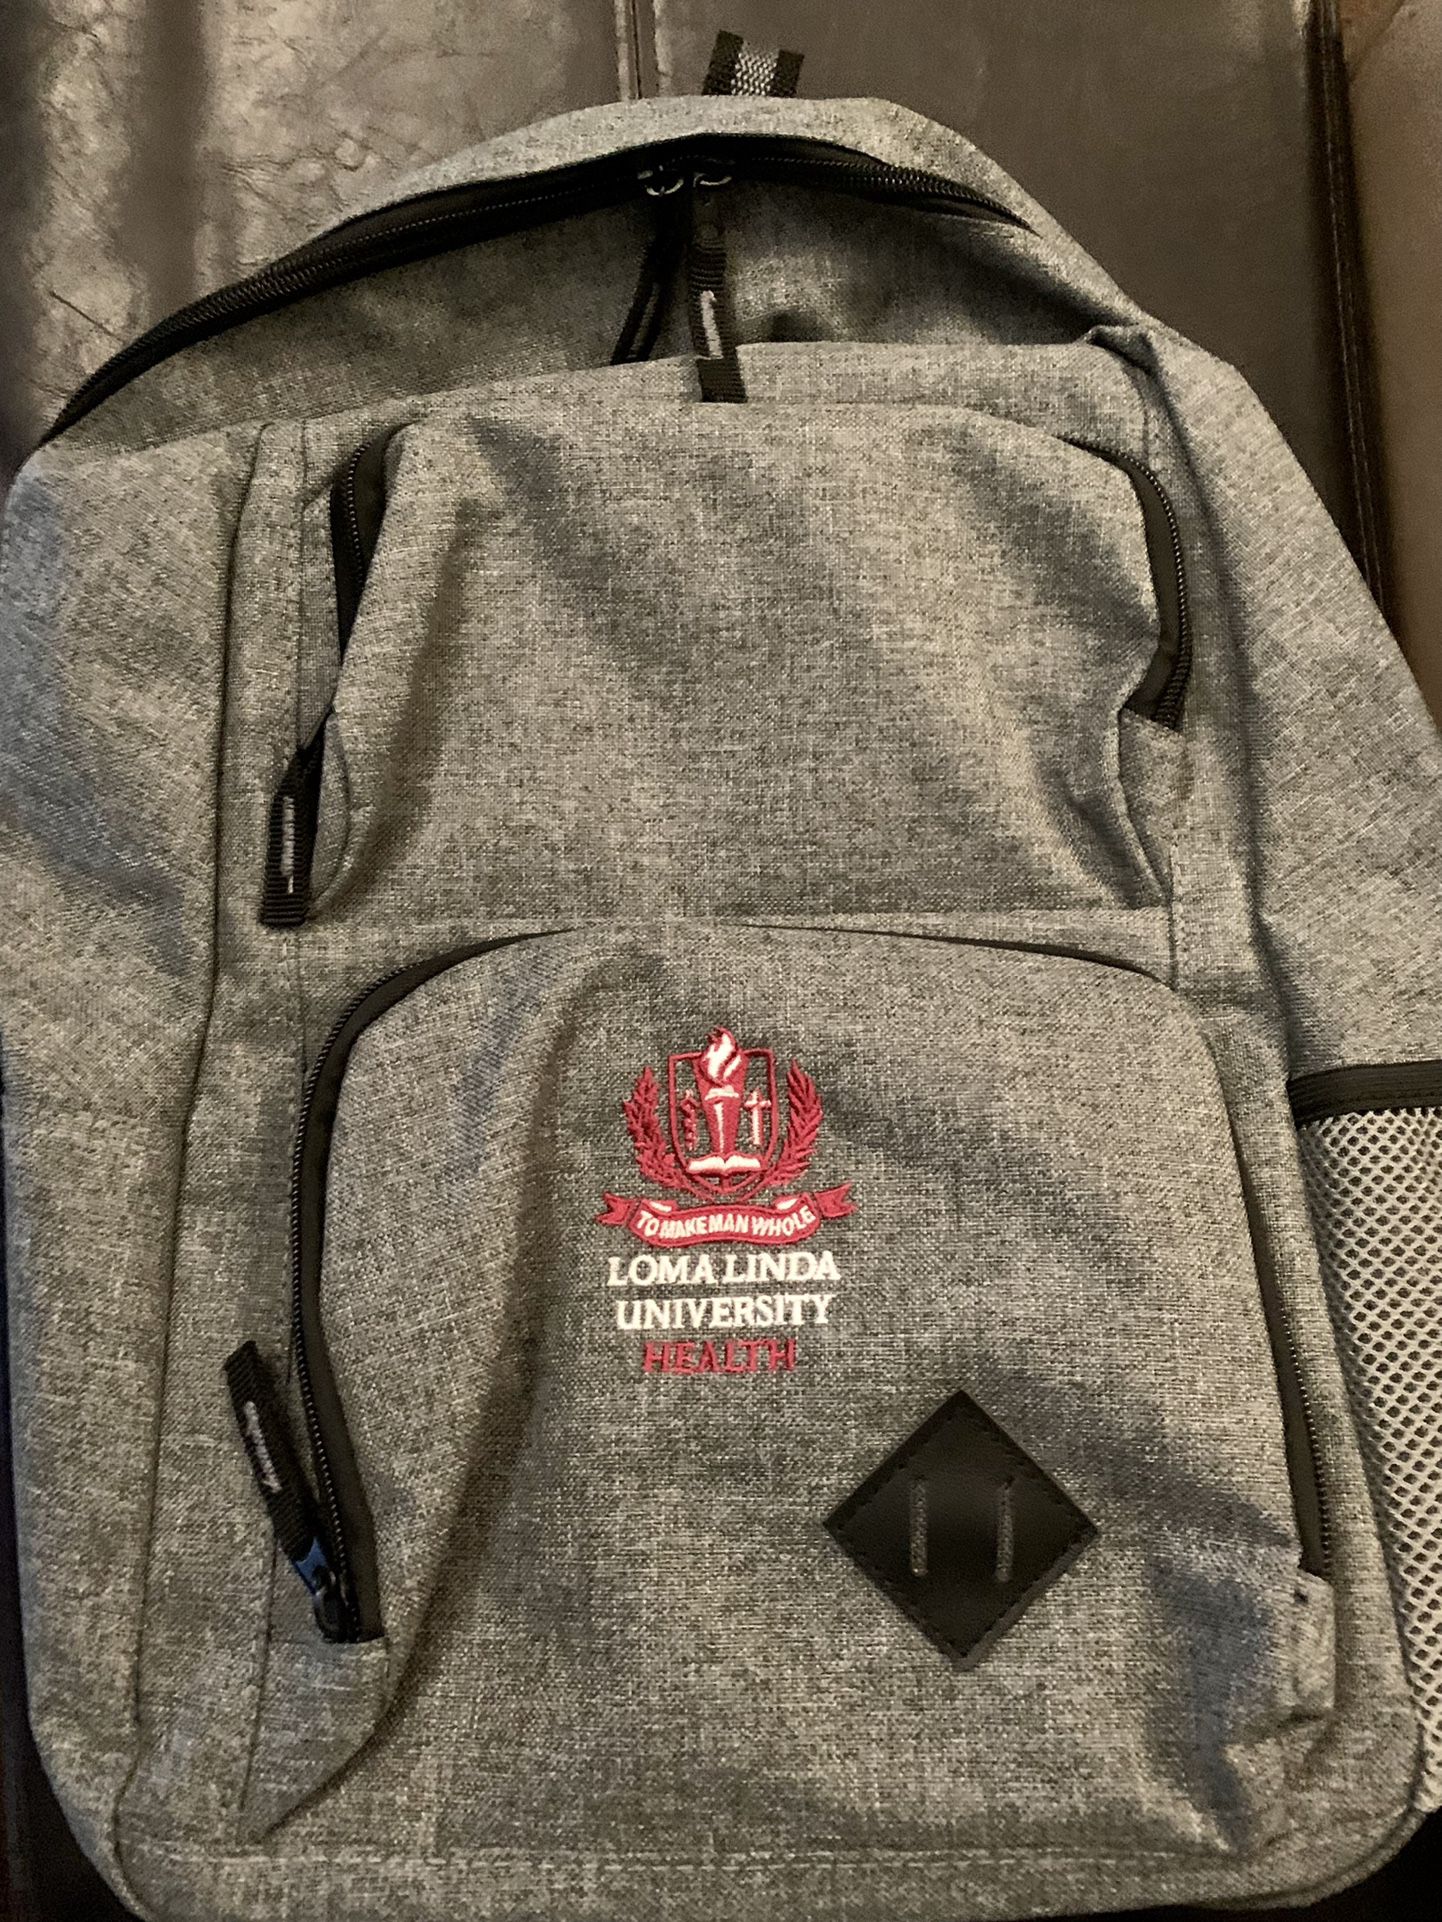 Dodgers Backpack Clear for Sale in Arcadia, CA - OfferUp